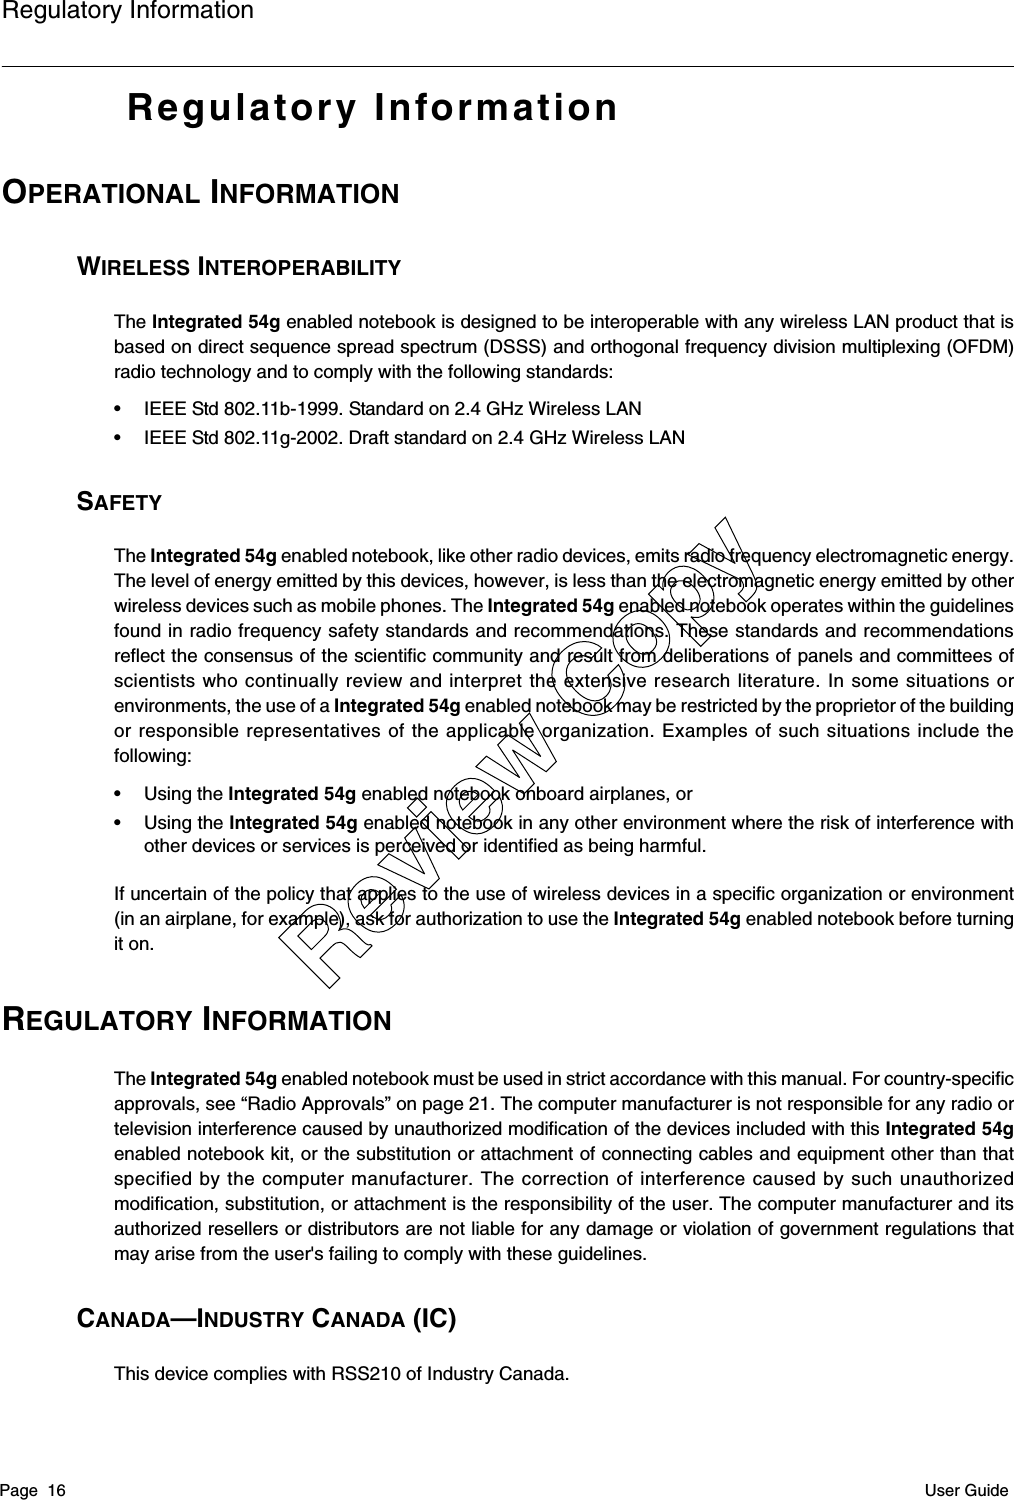 Regulatory InformationPage  16 User GuideRegulatory InformationOPERATIONAL INFORMATIONWIRELESS INTEROPERABILITYThe Integrated 54g enabled notebook is designed to be interoperable with any wireless LAN product that isbased on direct sequence spread spectrum (DSSS) and orthogonal frequency division multiplexing (OFDM)radio technology and to comply with the following standards:• IEEE Std 802.11b-1999. Standard on 2.4 GHz Wireless LAN• IEEE Std 802.11g-2002. Draft standard on 2.4 GHz Wireless LANSAFETYThe Integrated 54g enabled notebook, like other radio devices, emits radio frequency electromagnetic energy.The level of energy emitted by this devices, however, is less than the electromagnetic energy emitted by otherwireless devices such as mobile phones. The Integrated 54g enabled notebook operates within the guidelinesfound in radio frequency safety standards and recommendations. These standards and recommendationsreflect the consensus of the scientific community and result from deliberations of panels and committees ofscientists who continually review and interpret the extensive research literature. In some situations orenvironments, the use of a Integrated 54g enabled notebook may be restricted by the proprietor of the buildingor responsible representatives of the applicable organization. Examples of such situations include thefollowing:• Using the Integrated 54g enabled notebook onboard airplanes, or• Using the Integrated 54g enabled notebook in any other environment where the risk of interference withother devices or services is perceived or identified as being harmful.If uncertain of the policy that applies to the use of wireless devices in a specific organization or environment(in an airplane, for example), ask for authorization to use the Integrated 54g enabled notebook before turningit on.REGULATORY INFORMATIONThe Integrated 54g enabled notebook must be used in strict accordance with this manual. For country-specificapprovals, see “Radio Approvals” on page 21. The computer manufacturer is not responsible for any radio ortelevision interference caused by unauthorized modification of the devices included with this Integrated 54genabled notebook kit, or the substitution or attachment of connecting cables and equipment other than thatspecified by the computer manufacturer. The correction of interference caused by such unauthorizedmodification, substitution, or attachment is the responsibility of the user. The computer manufacturer and itsauthorized resellers or distributors are not liable for any damage or violation of government regulations thatmay arise from the user&apos;s failing to comply with these guidelines.CANADA—INDUSTRY CANADA (IC)This device complies with RSS210 of Industry Canada.Review Copy